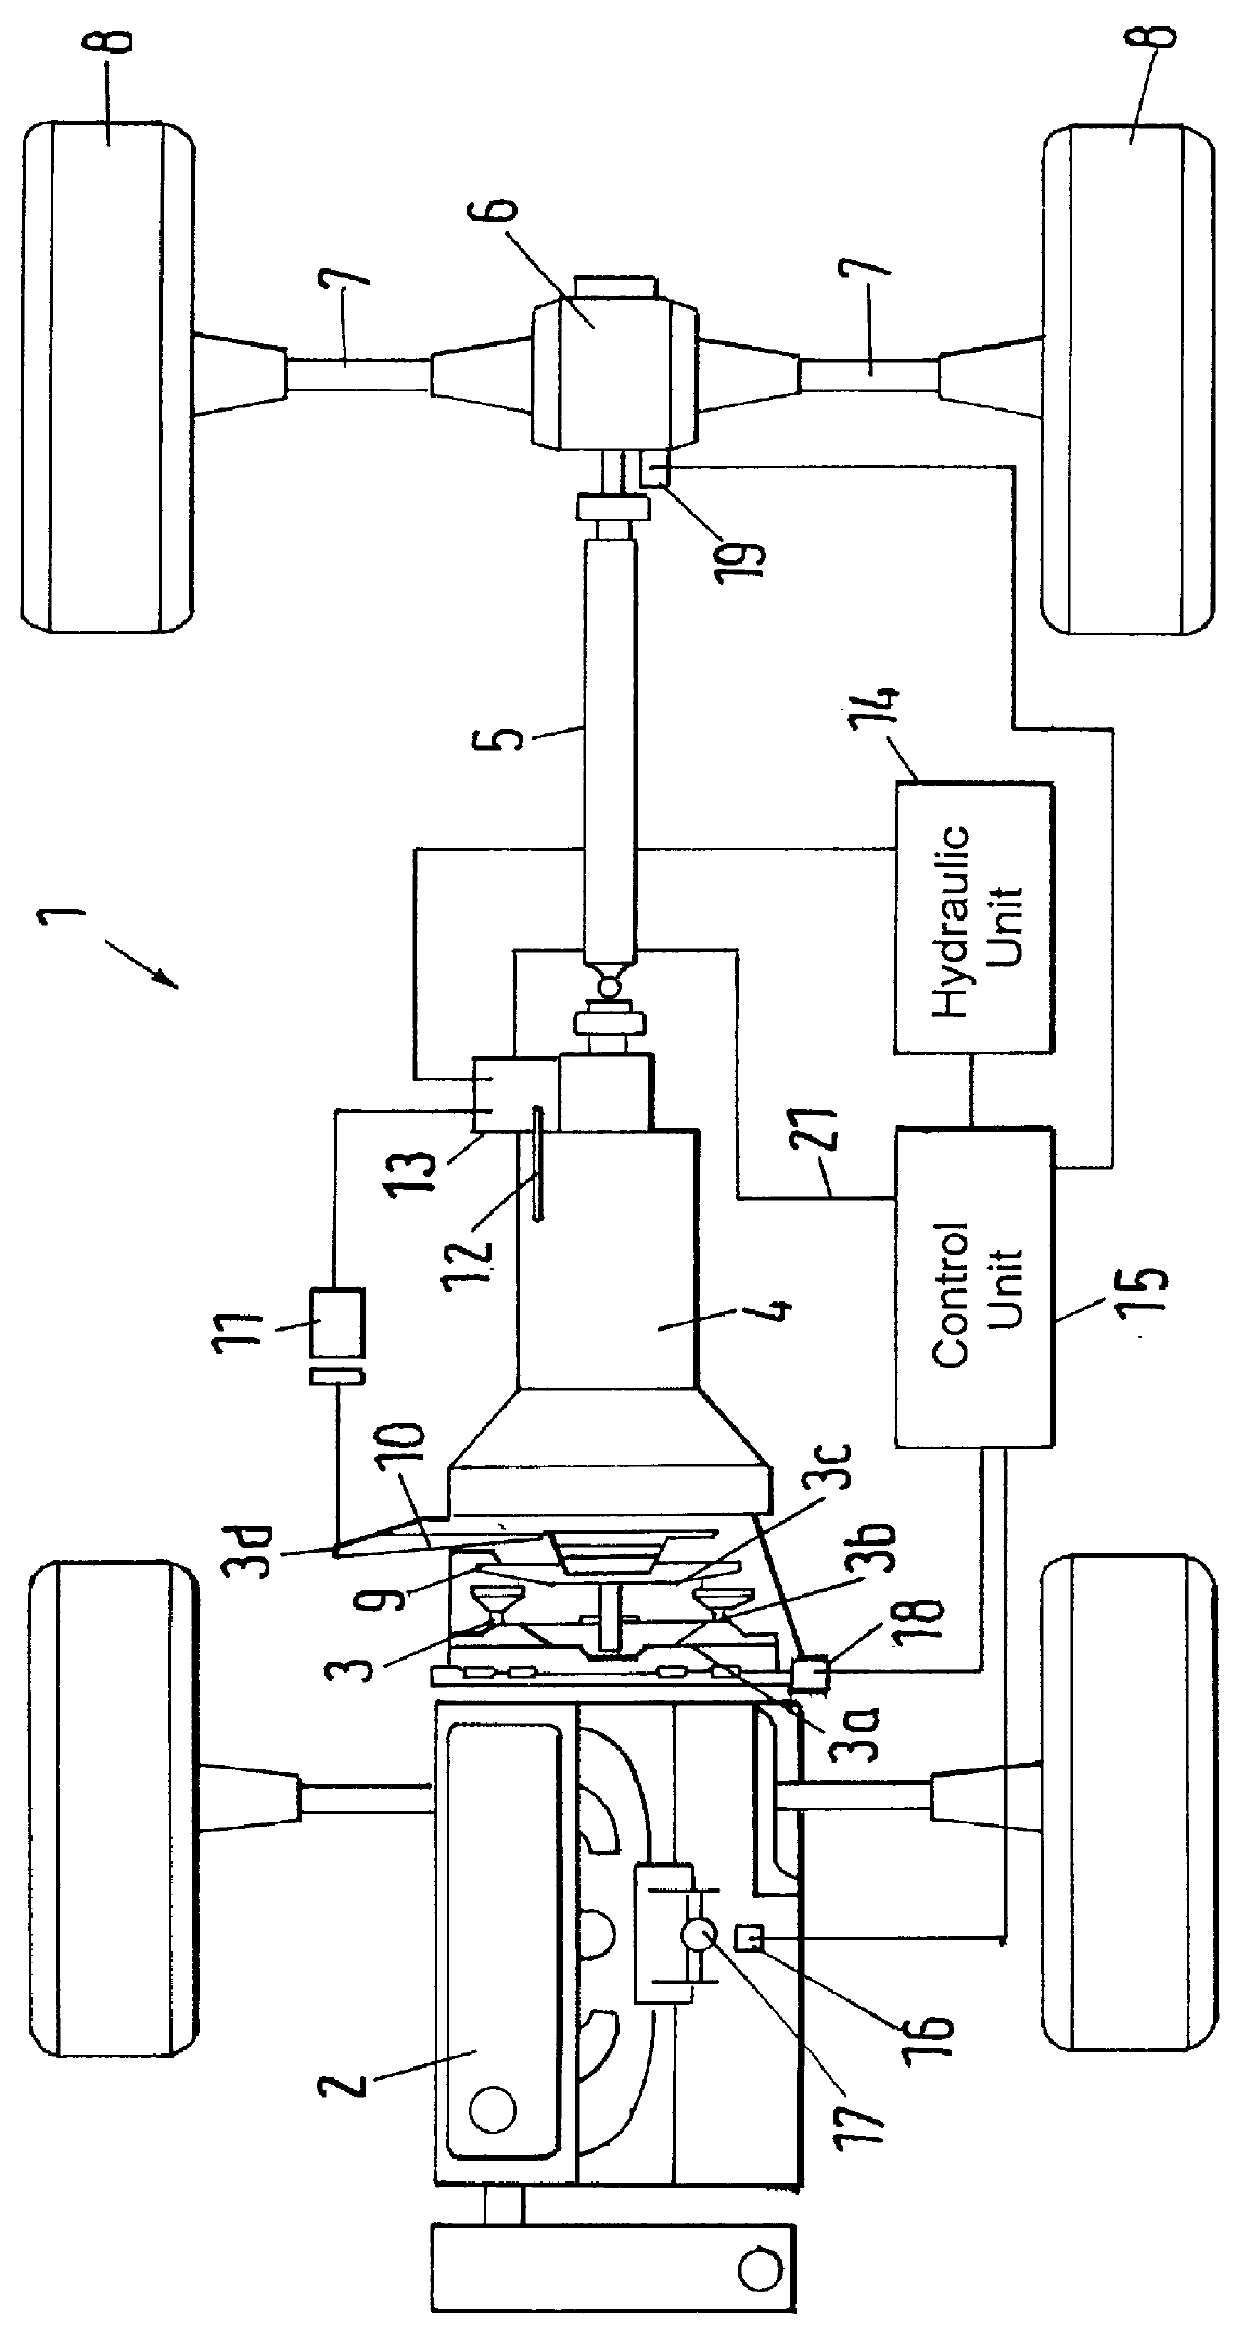 Method of and apparatus for actuating the torque transmitting system and the transmission in the power train of a motor vehicle